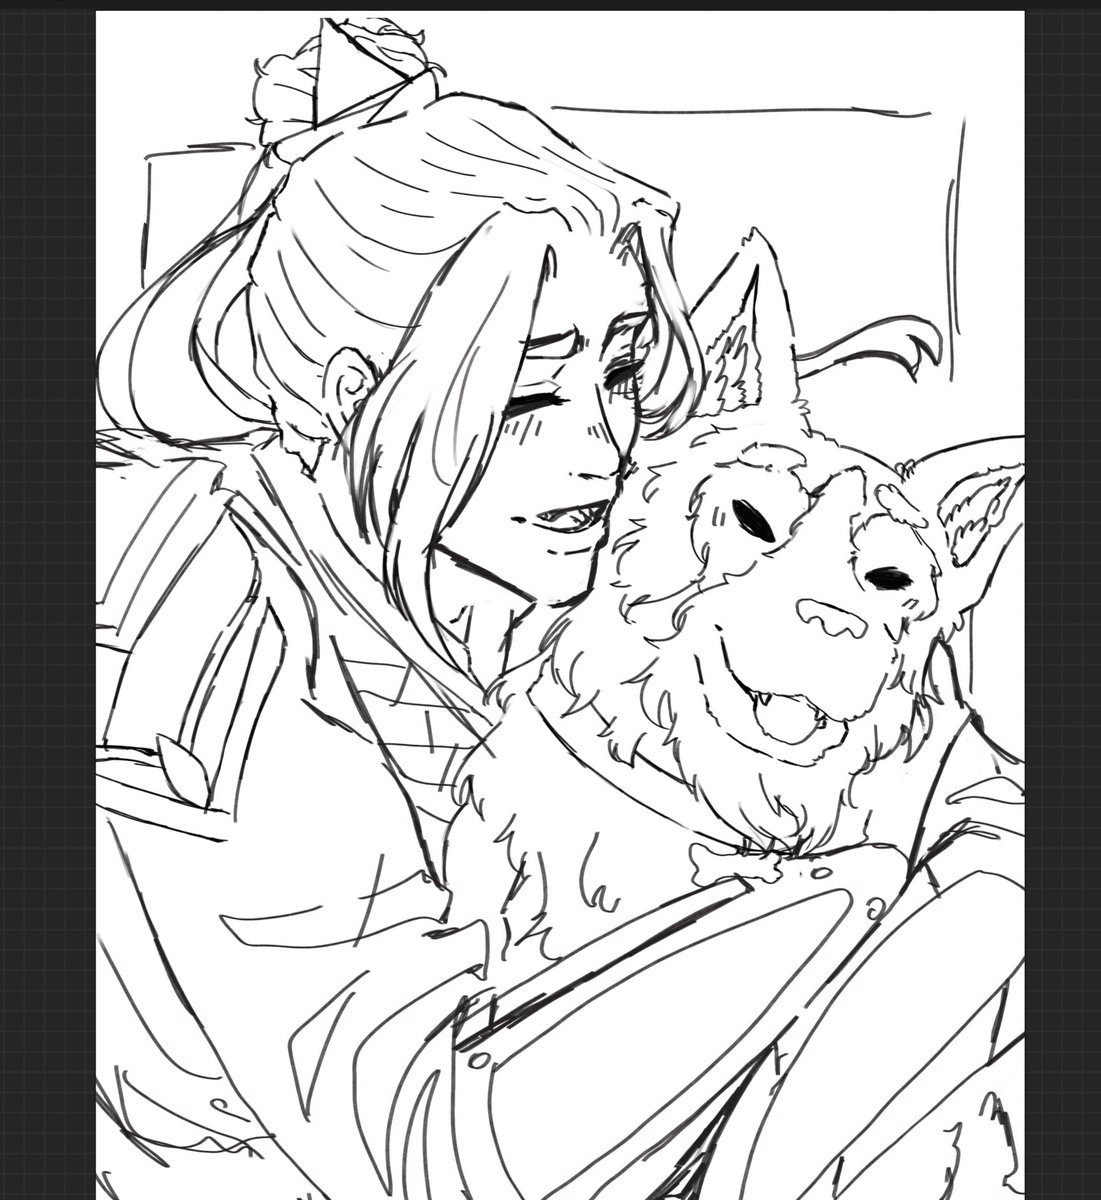 Feng Xin definitely has a silly German shepherd and no one can tell me otherwise 

#fengxin #tgcf #fengqing